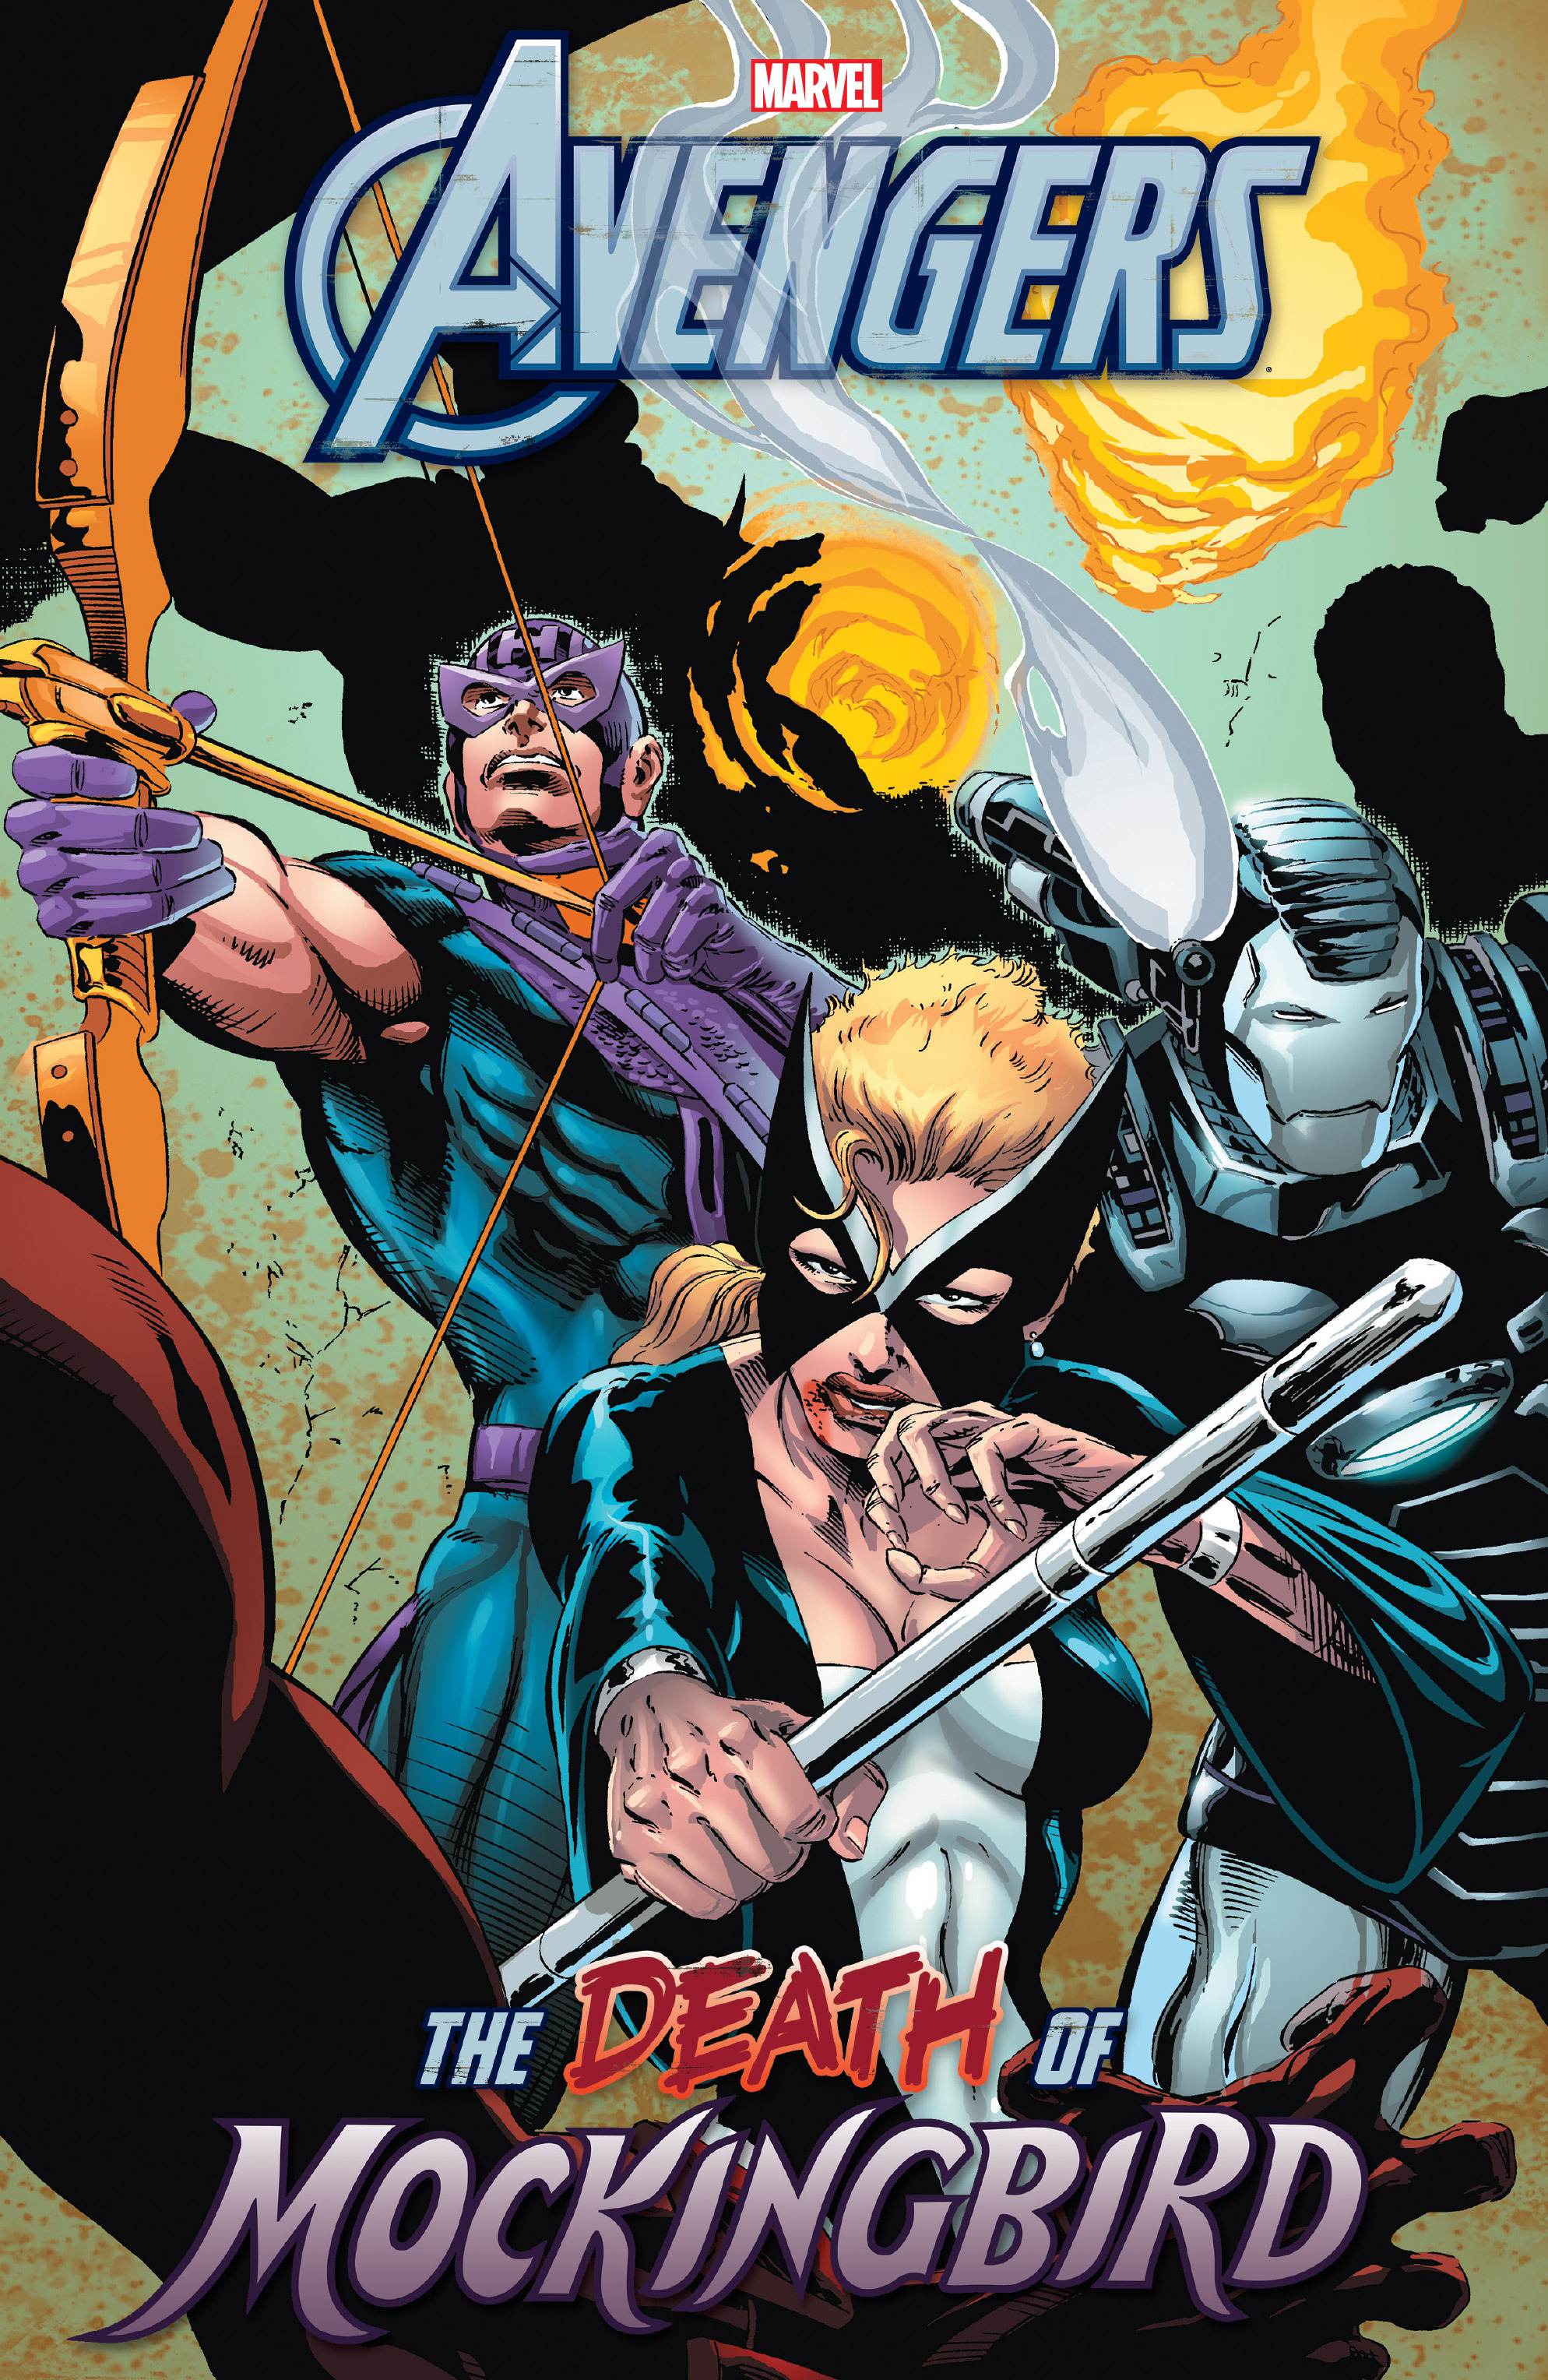 Read online Avengers: The Death of Mockingbird comic -  Issue # TPB (Part 1) - 1